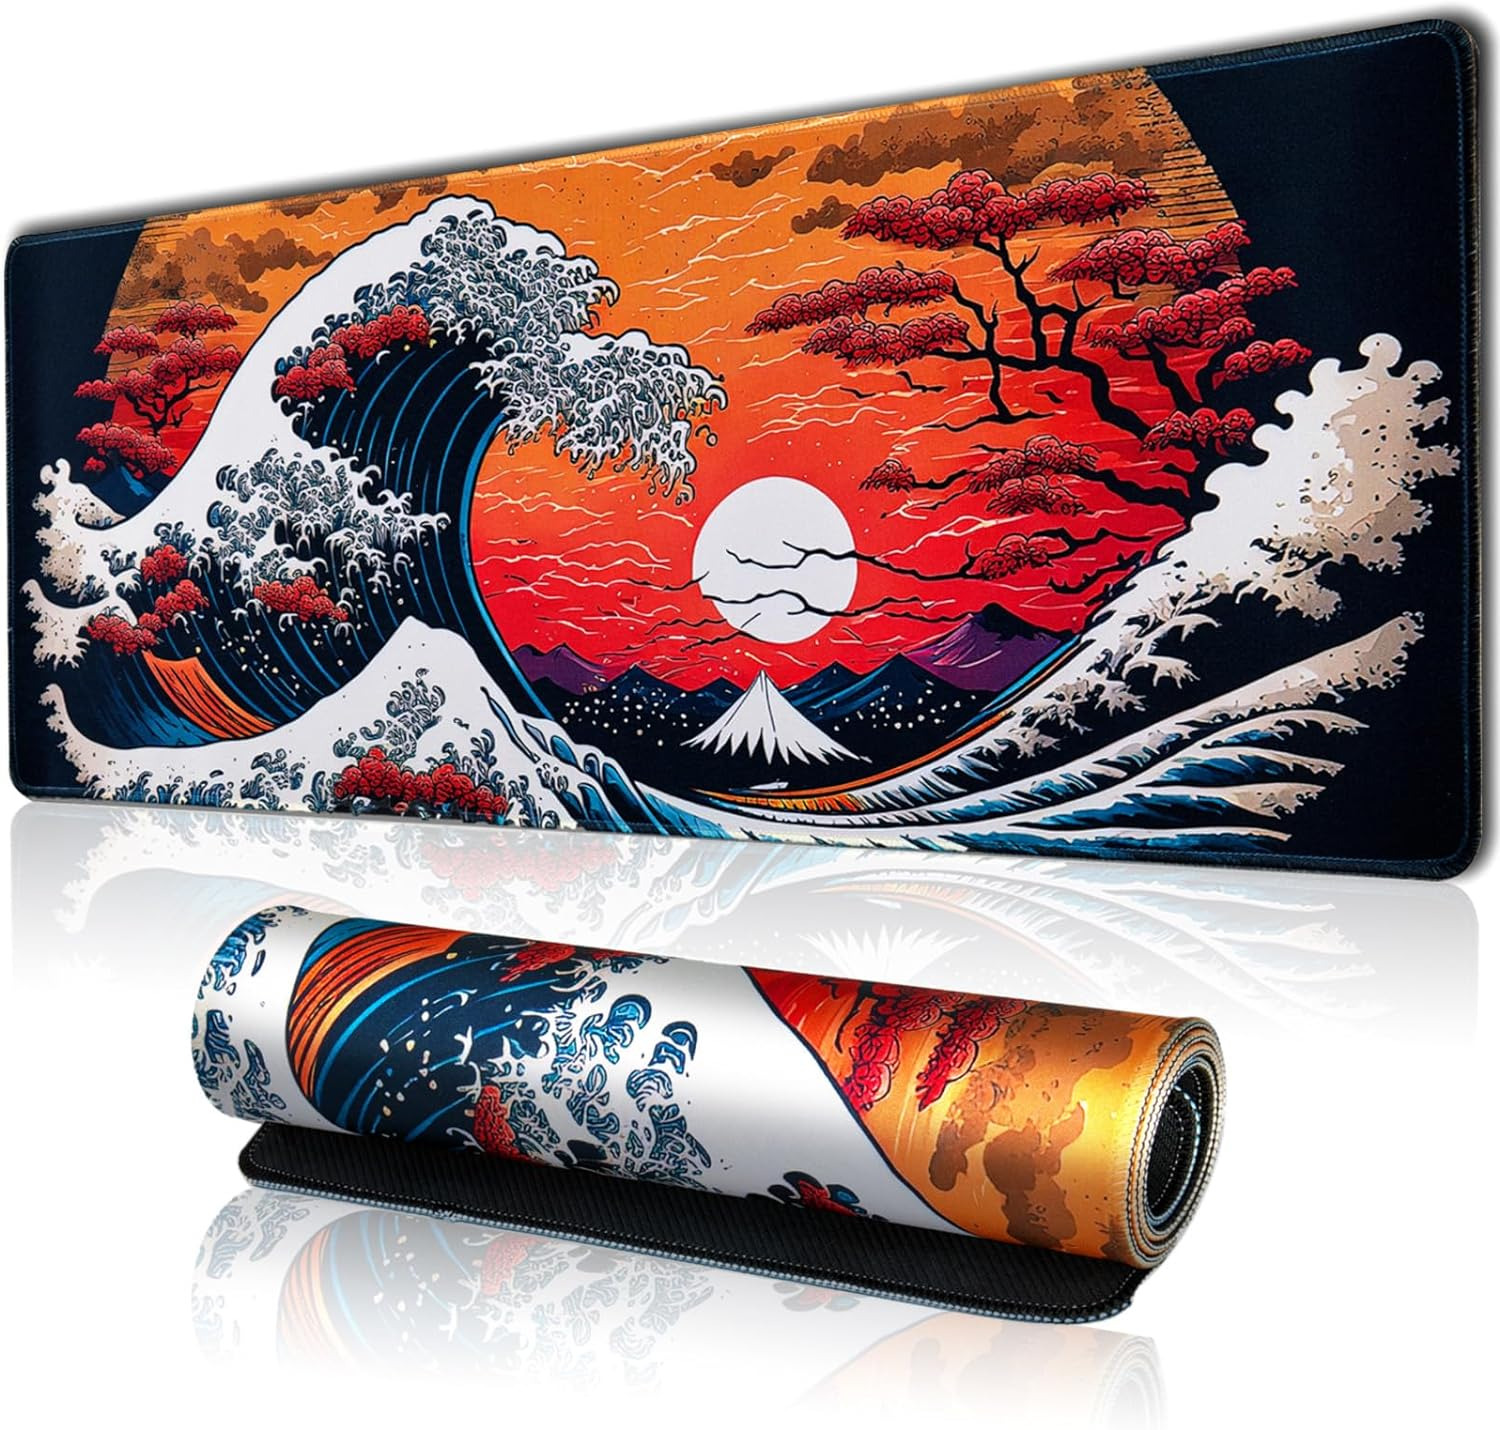 Japanese Sea Waves Large Gaming Mouse Pad for Desk, Desk Mat with Seamed Edges